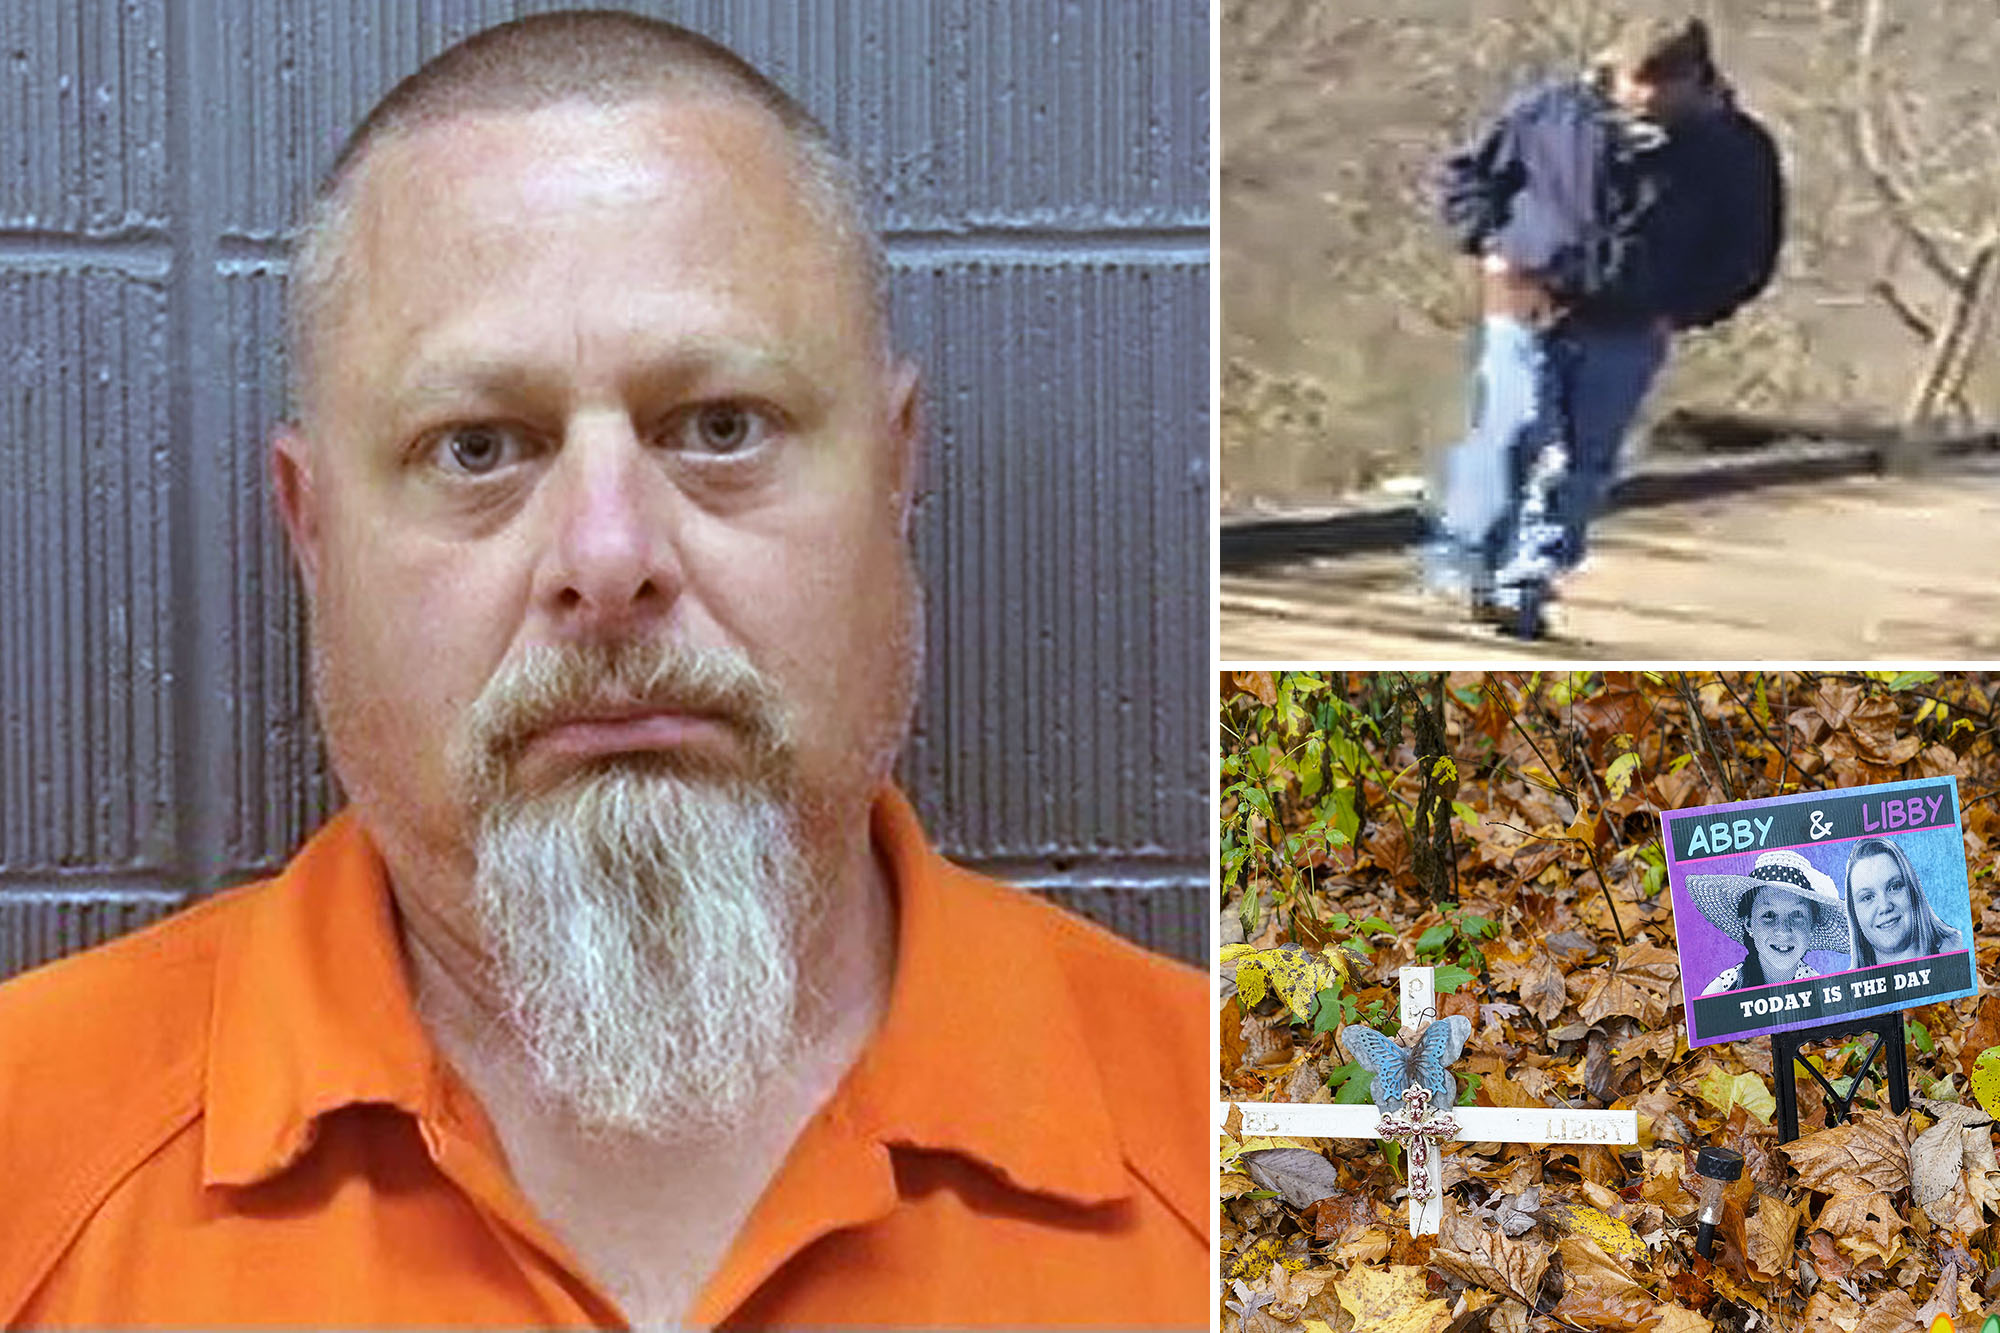 Who is Richard Allen? What we know about Delphi murder suspect